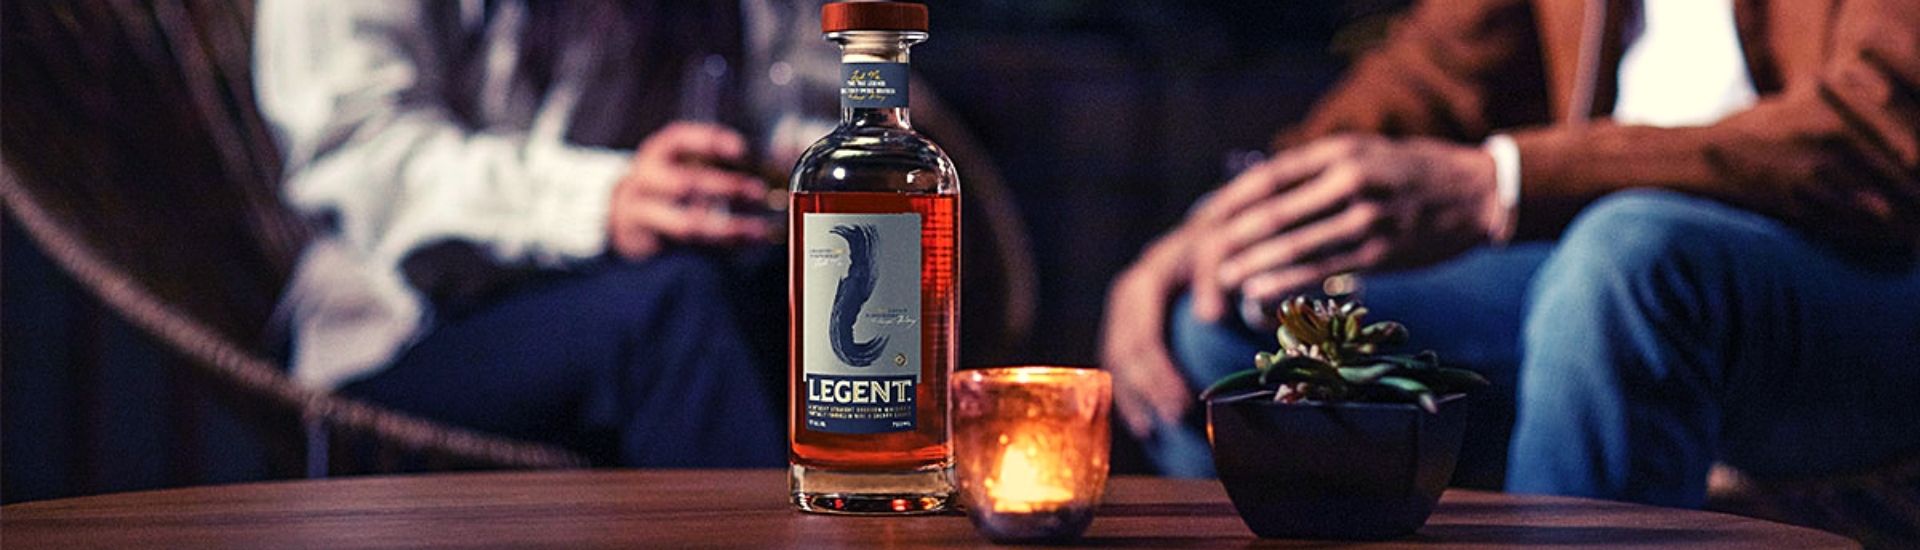 legent bourbon bottle and glass on table